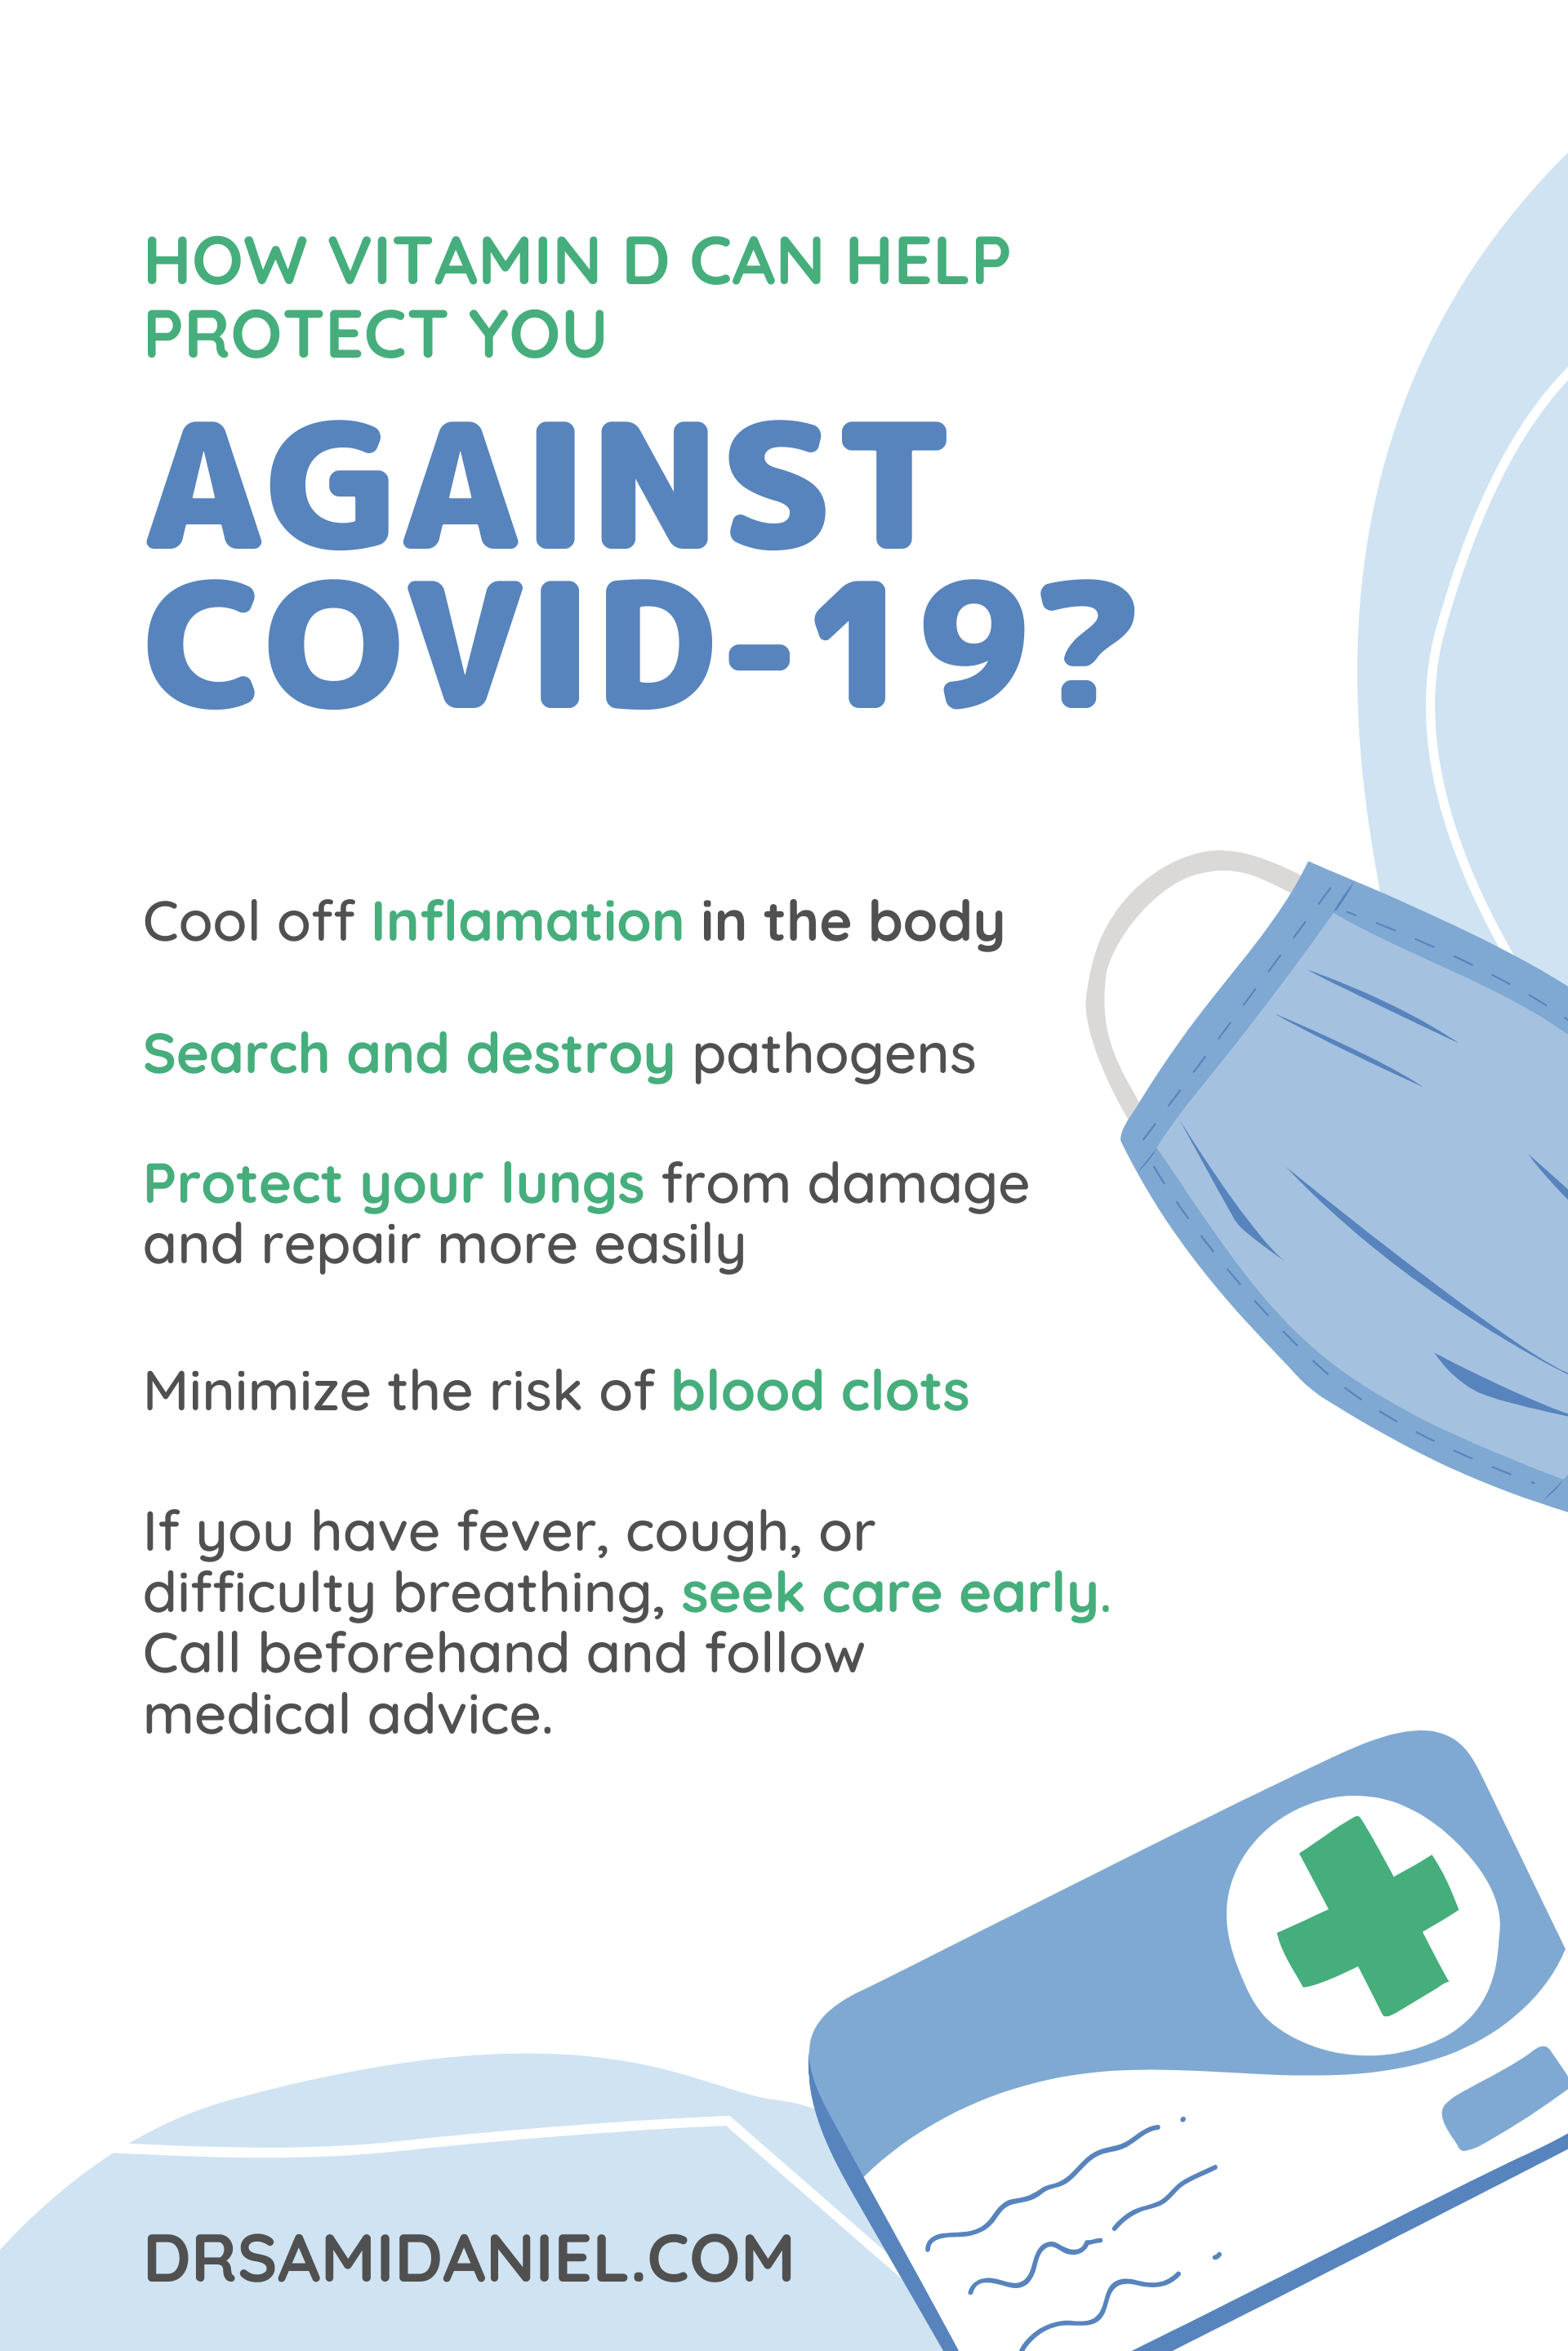 How Vitamin D can help protect me against Covid-19